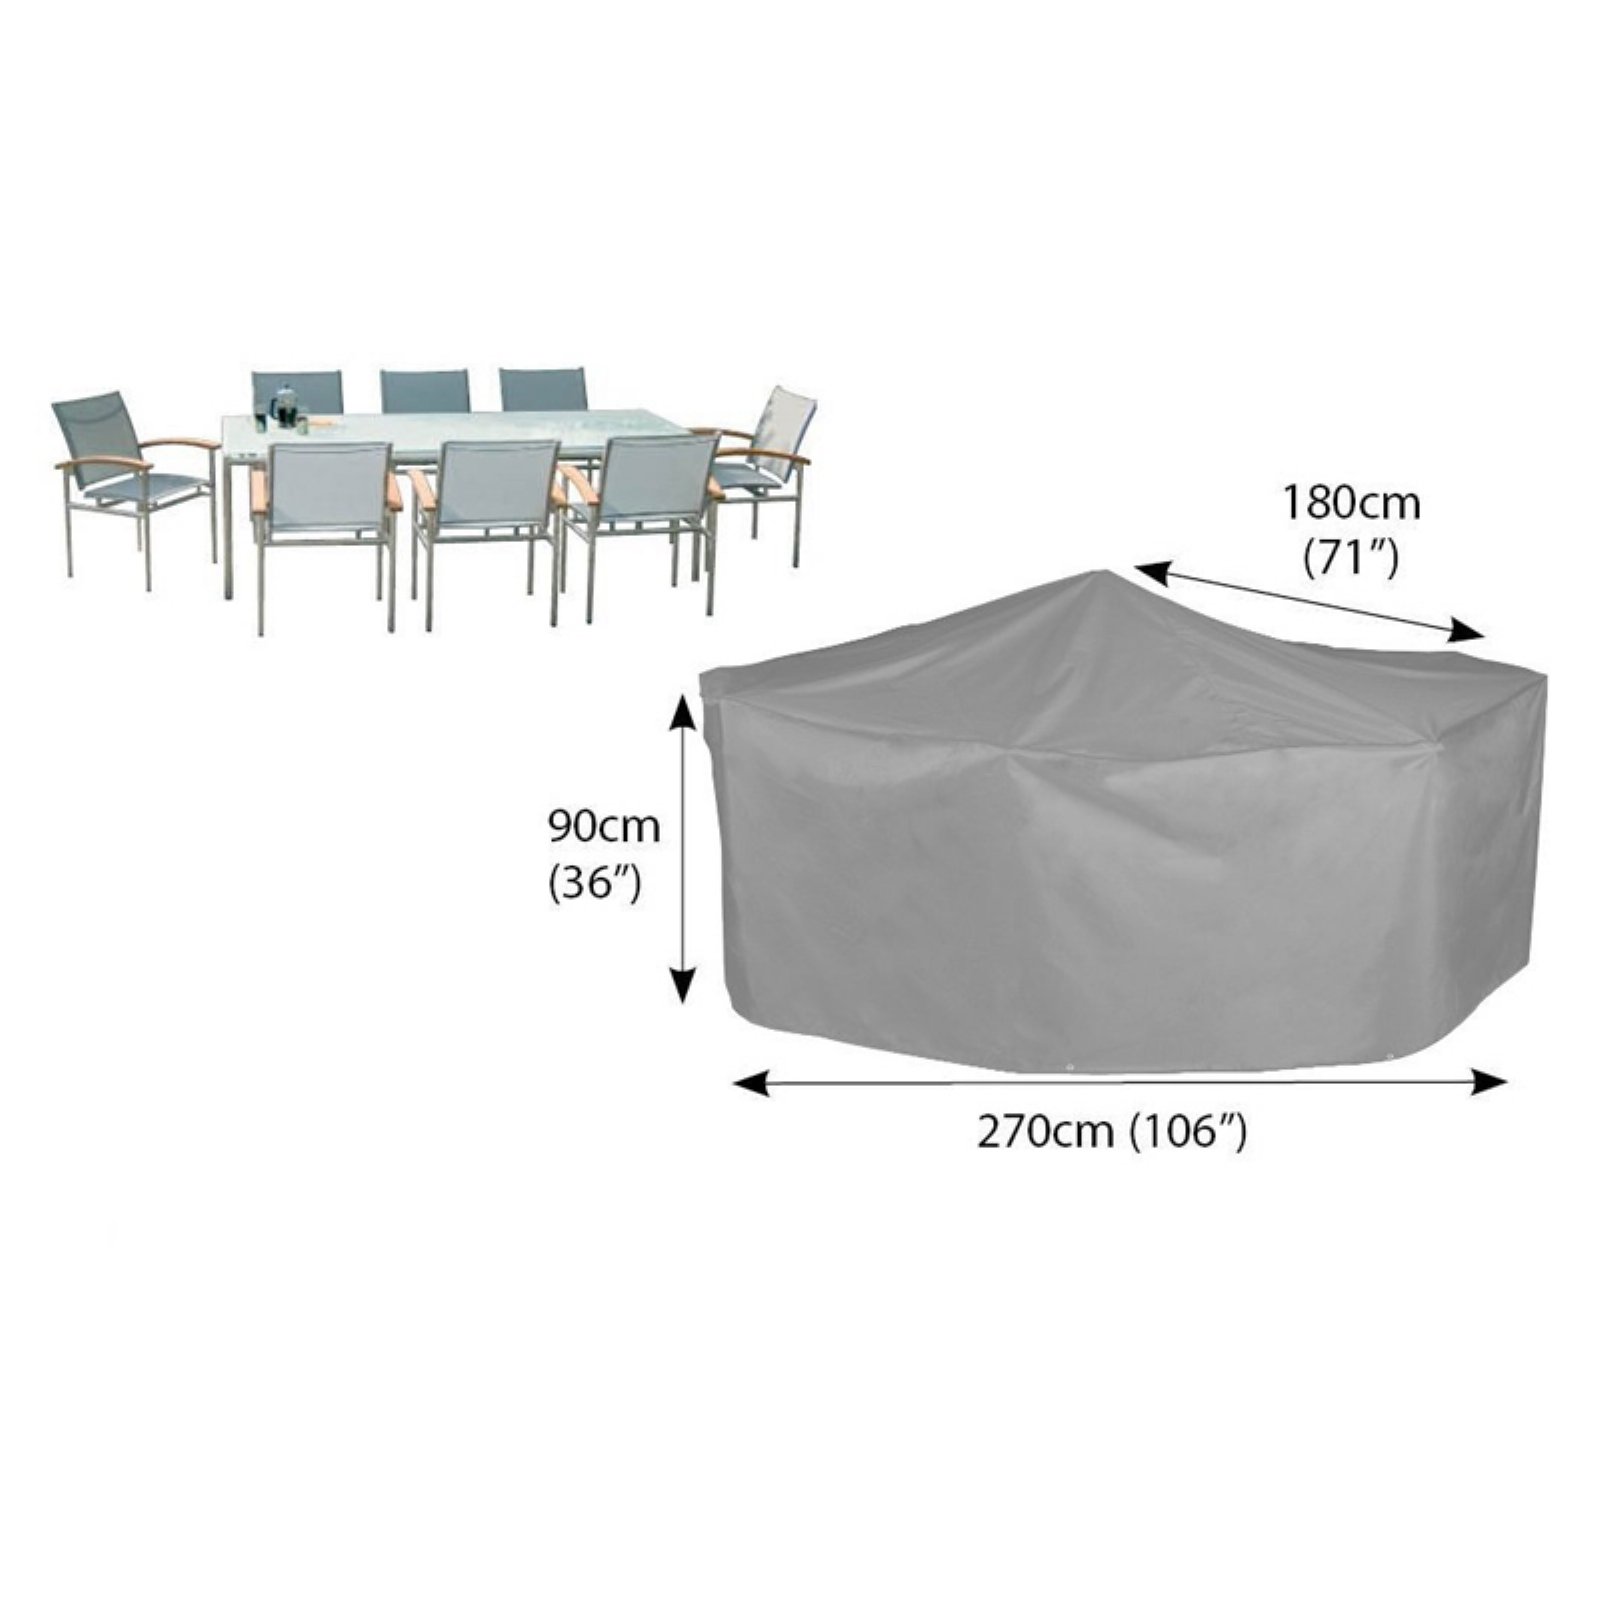 Bosmere Waterproof Grey Outdoor Rectangle Table & 6 Chair Set Cover - 106L x 71W x 36H in. - image 4 of 4